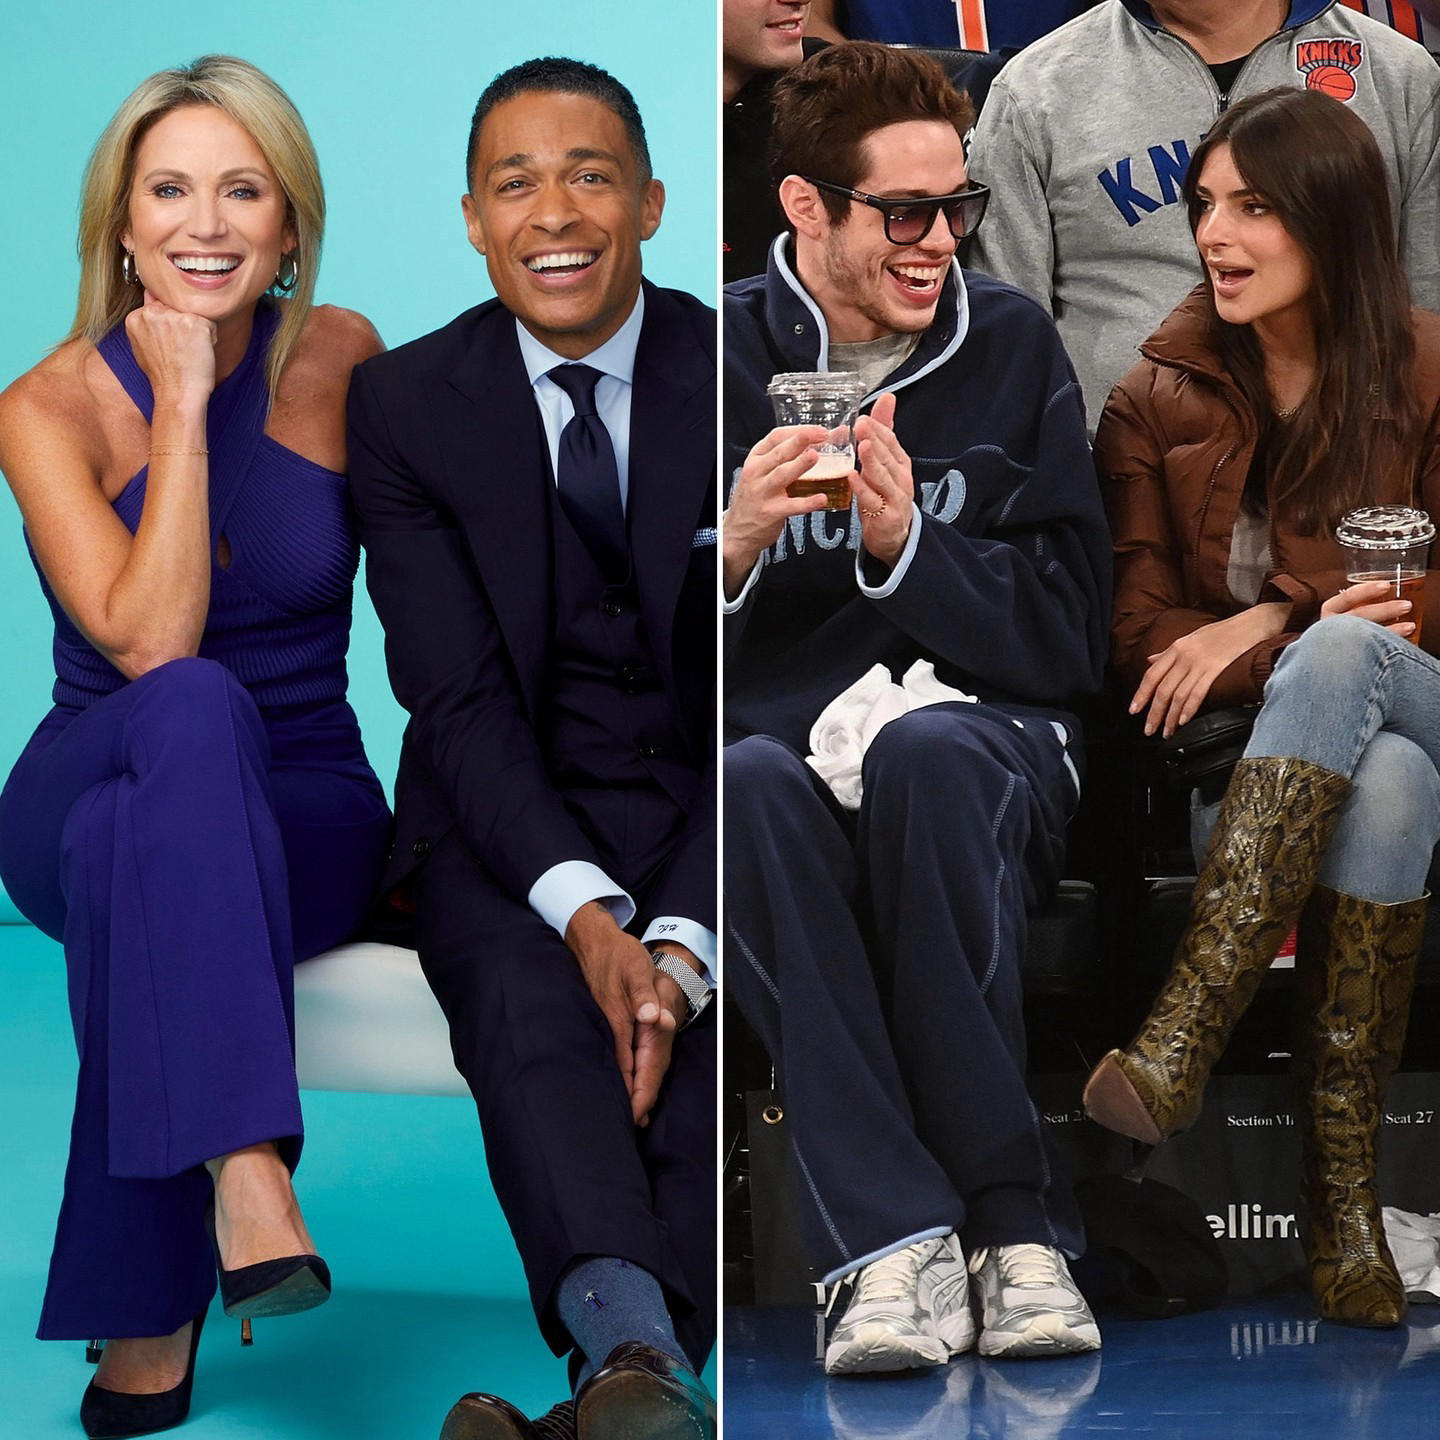 image  1 Us Weekly - Celeb hookups were on FIRE this year